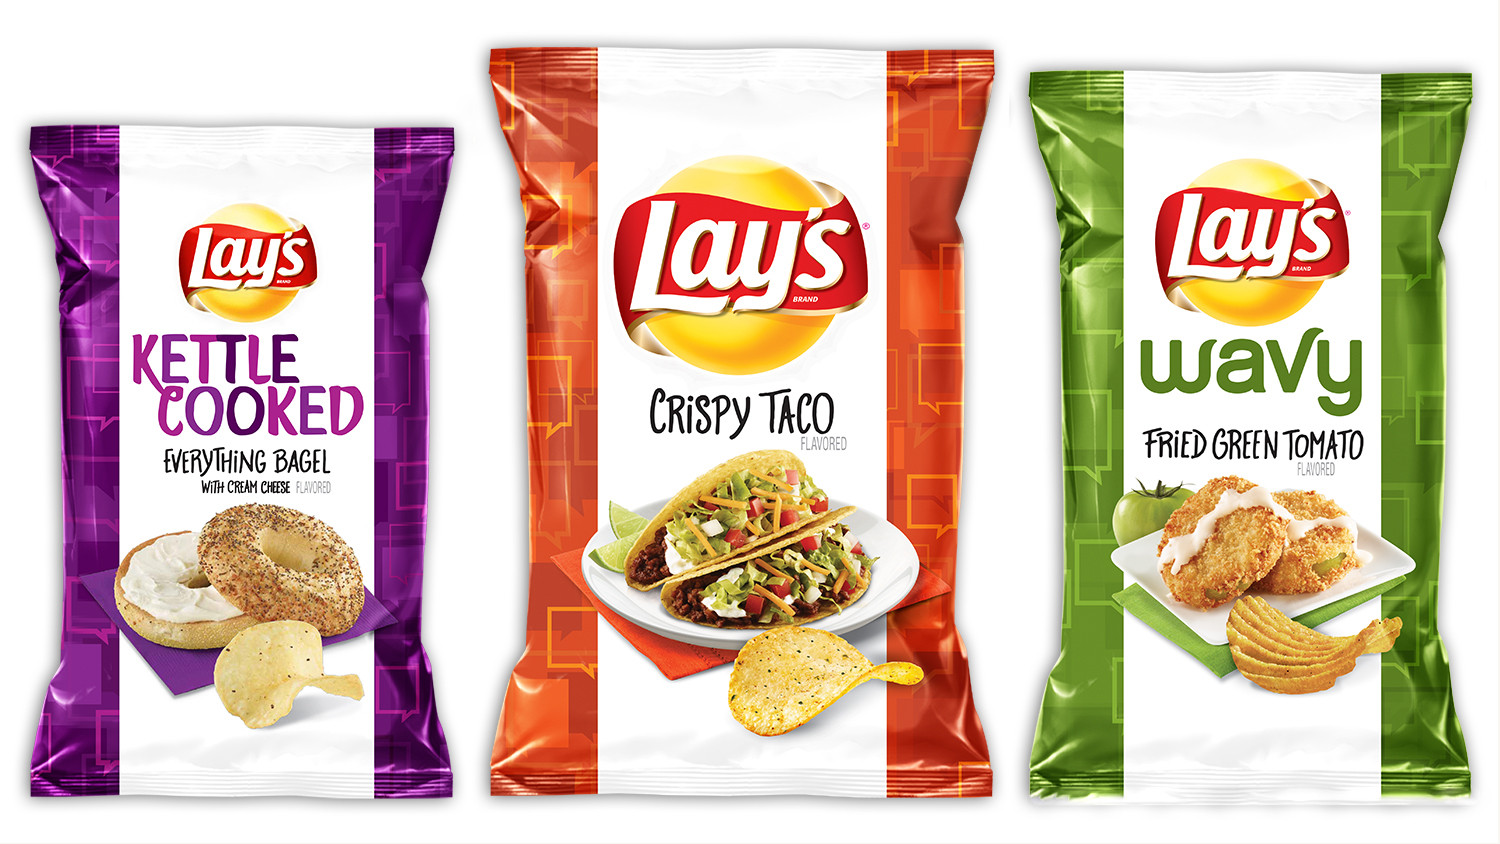 Lays Potato Chips Flavors
 We Tasted the Finalists for Lay s Newest Potato Chip